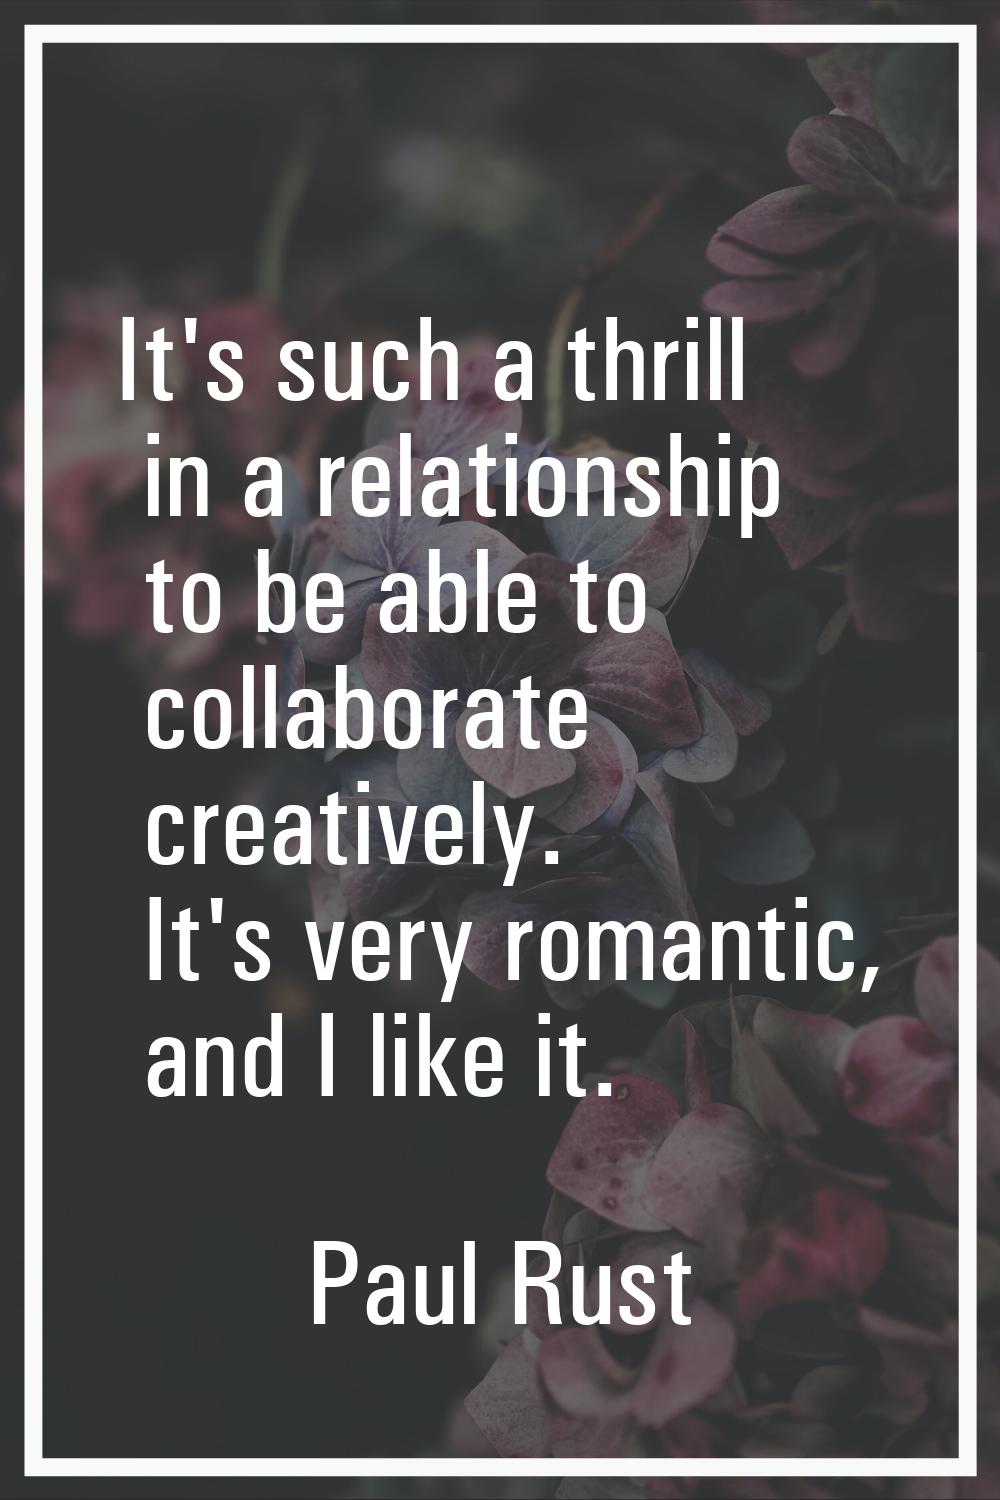 It's such a thrill in a relationship to be able to collaborate creatively. It's very romantic, and 